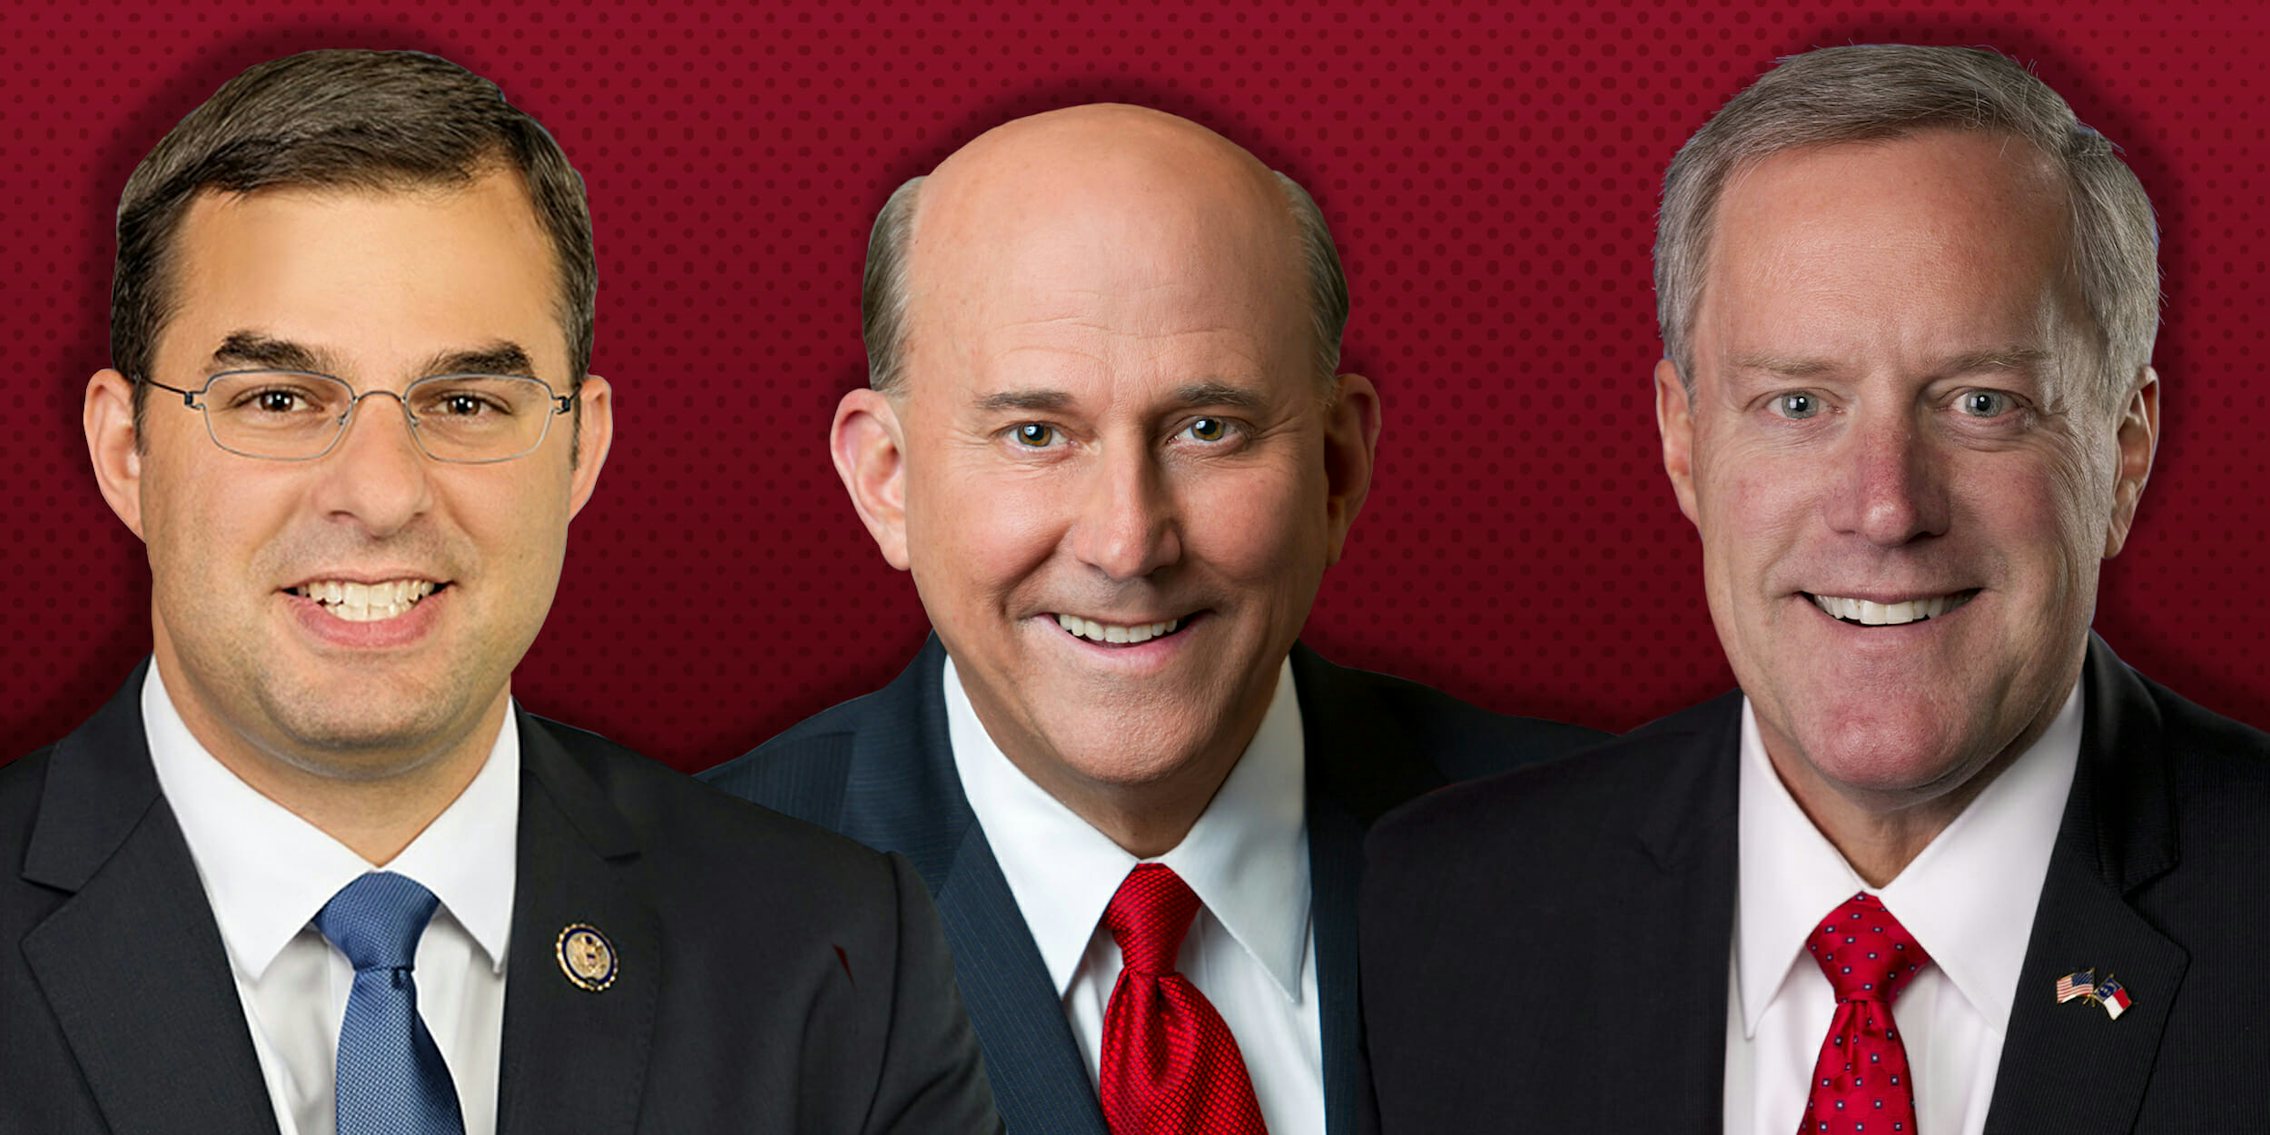 House Freedom Caucus: Justin Amash, Louis Gohmert, and Mark Meadows